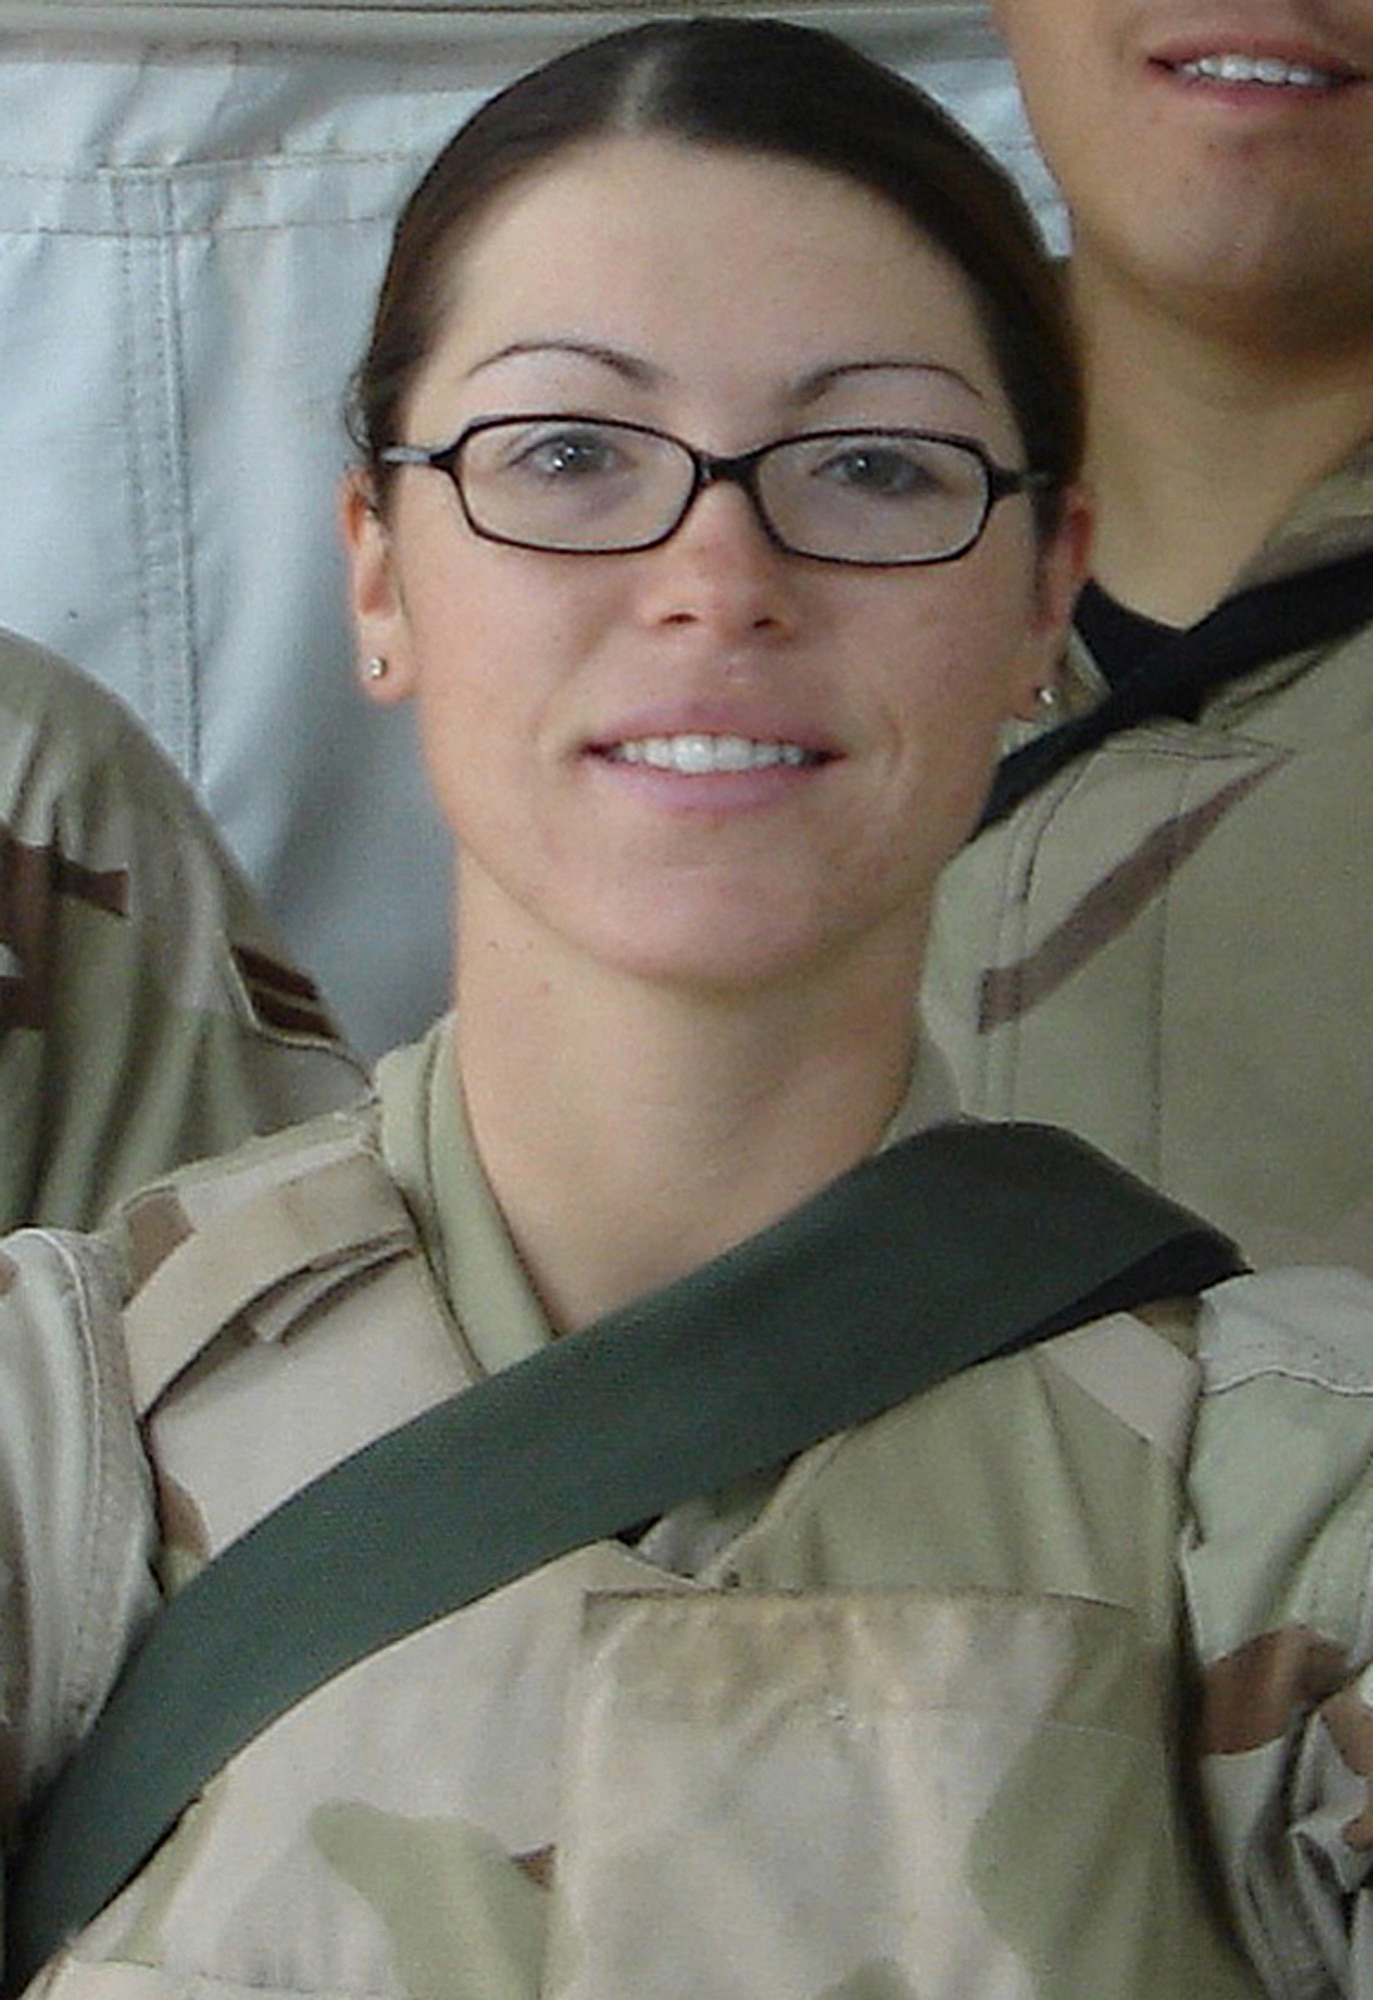 Airman 1st Class Elizabeth Jacobson was killed while providing convoy security Sept. 28 near Camp Bucca, Iraq, when the vehicle she was riding in was hit by an improvised explosive device. (U.S. Air Force photo) 